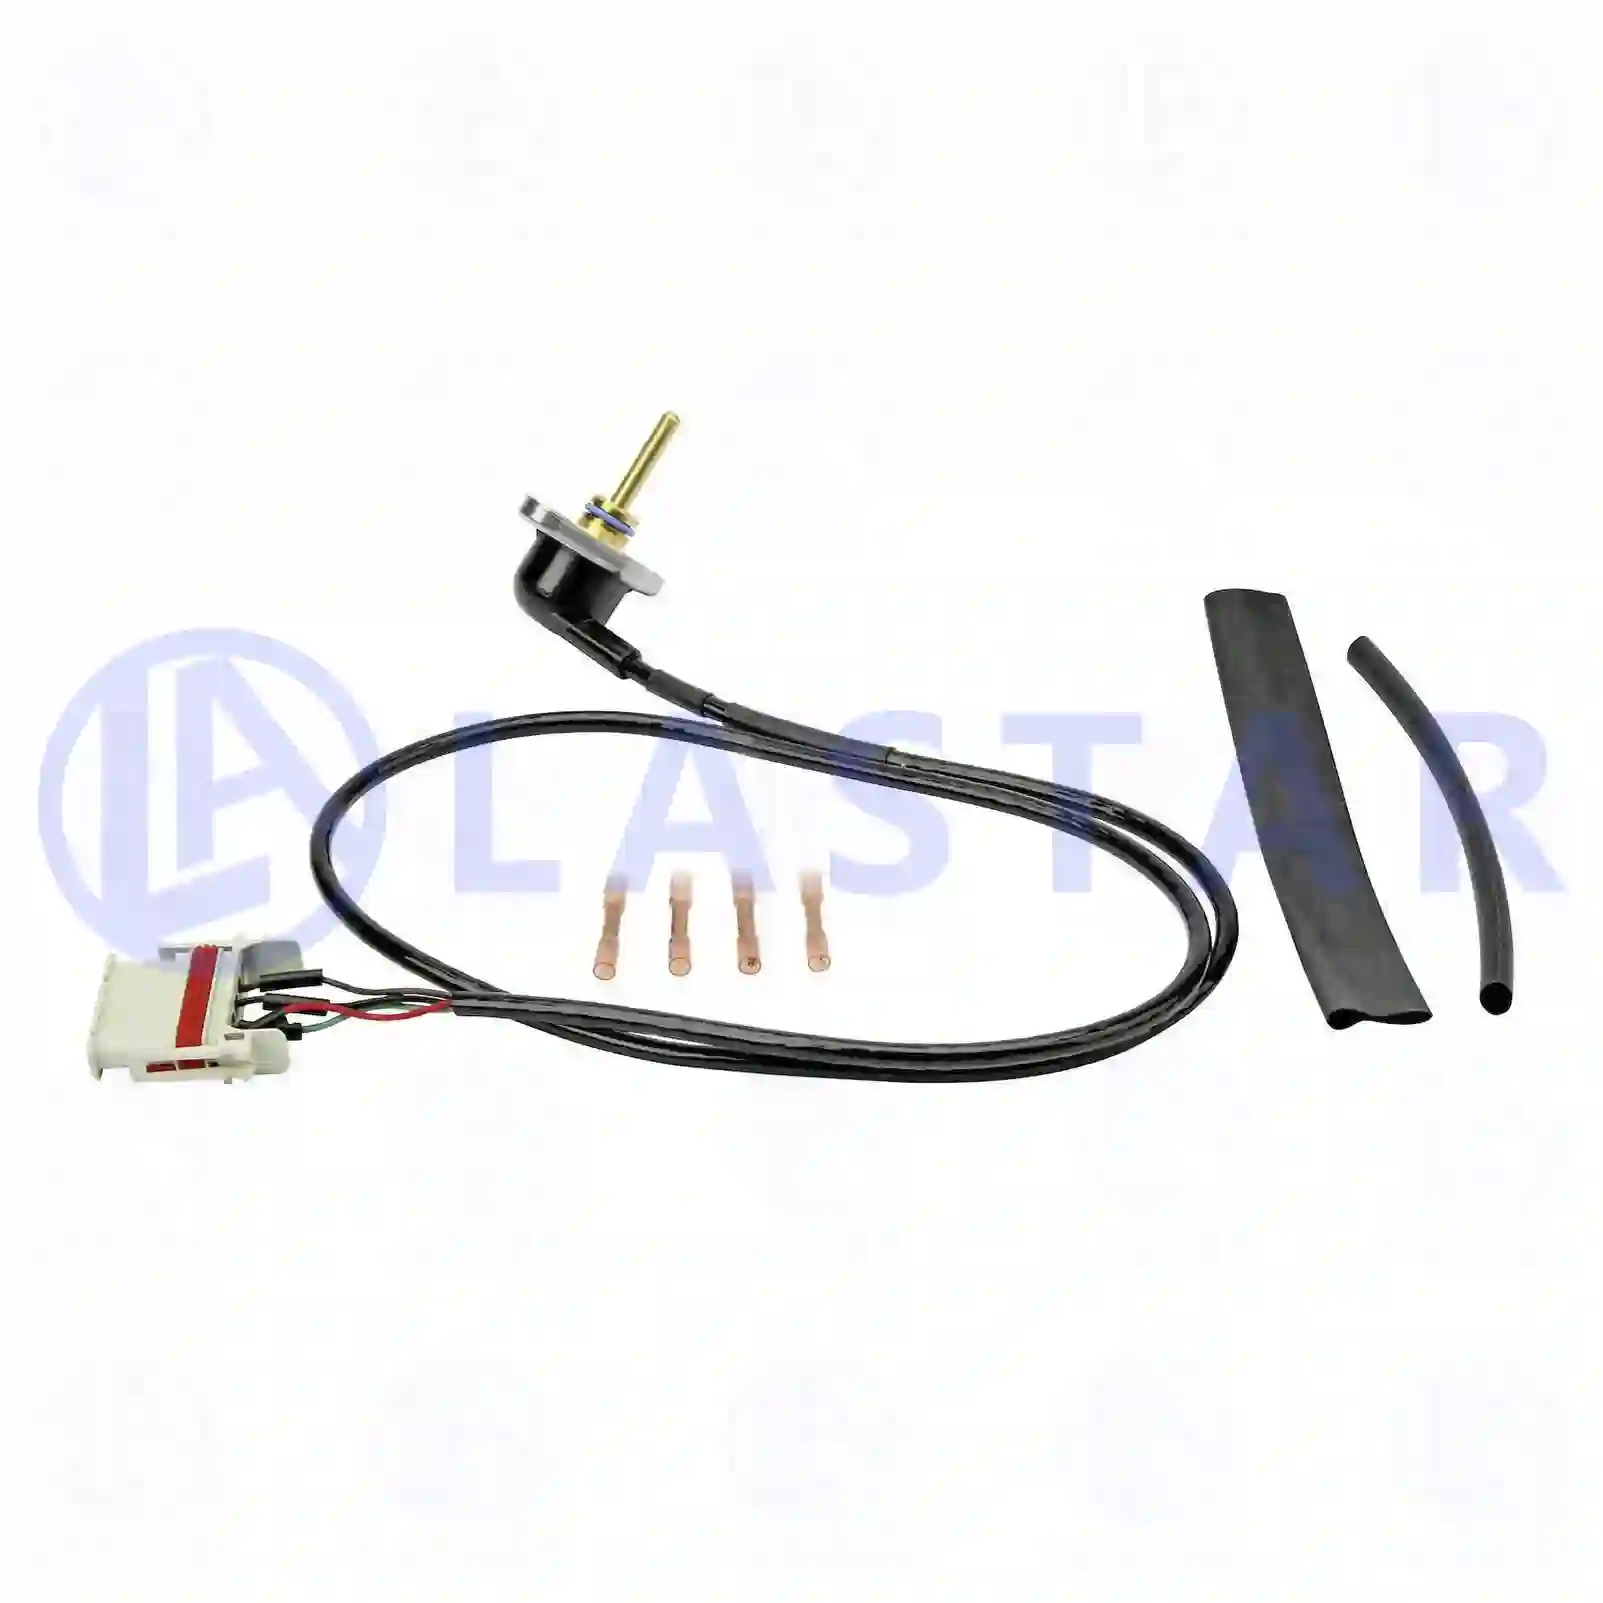 Charge pressure sensor, complete with mounting kit, 77702819, 1457305, 1471740, 1535520, 1787155, 1862787, 1862797, 1862890, 2131817, 2149696, 535520, ZG20357-0008 ||  77702819 Lastar Spare Part | Truck Spare Parts, Auotomotive Spare Parts Charge pressure sensor, complete with mounting kit, 77702819, 1457305, 1471740, 1535520, 1787155, 1862787, 1862797, 1862890, 2131817, 2149696, 535520, ZG20357-0008 ||  77702819 Lastar Spare Part | Truck Spare Parts, Auotomotive Spare Parts